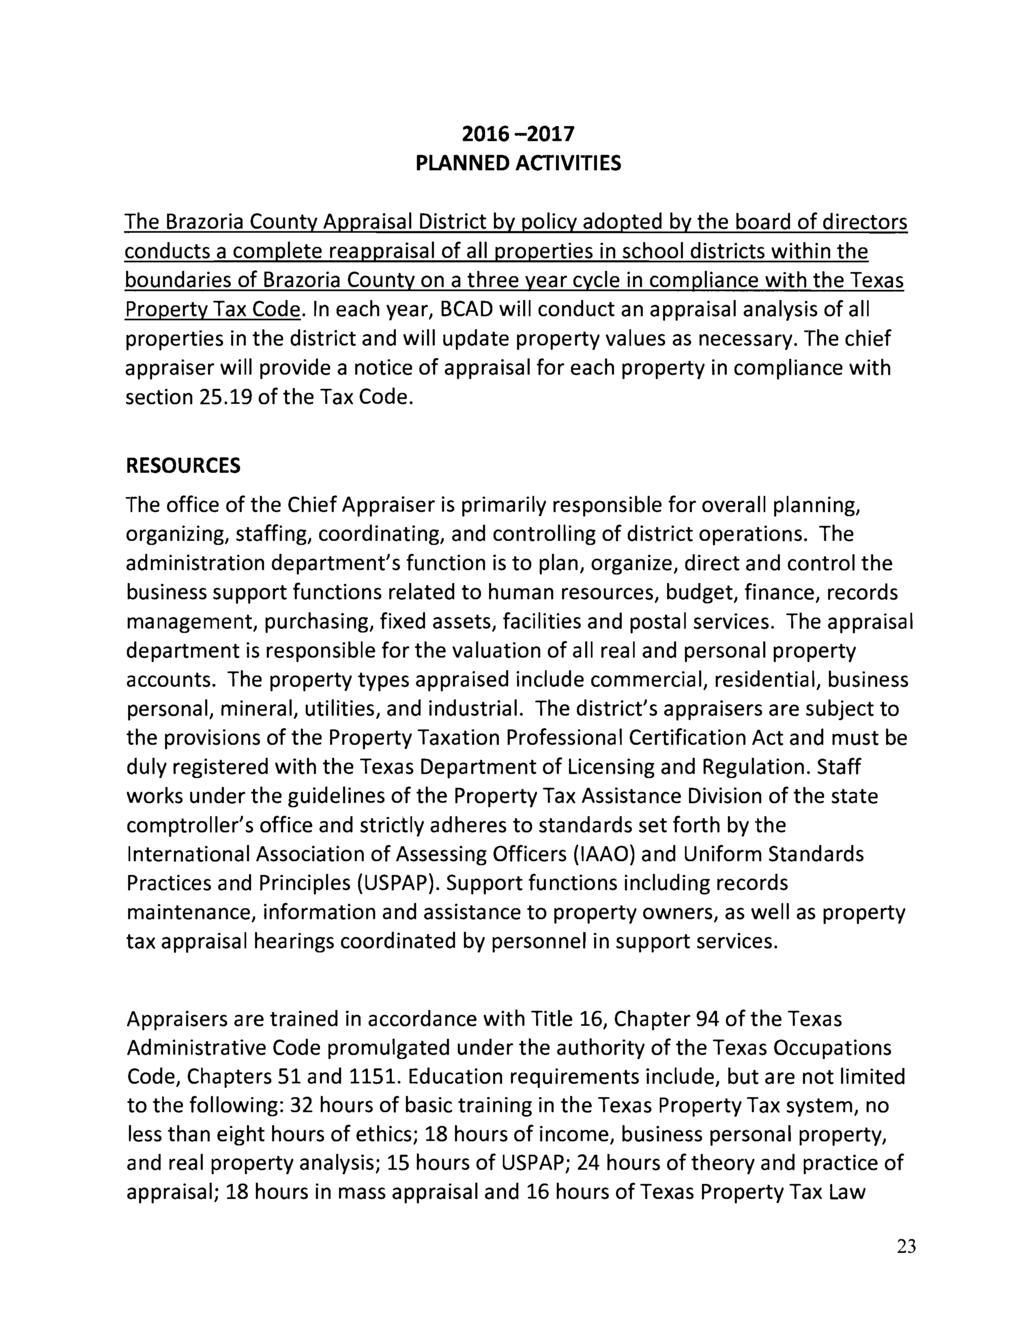 2016-2017 PLANNED ACnVrnES The Brazoria County Appraisal District by policy adopted by the board of directors conducts a complete reappraisal of all properties in school districts within the